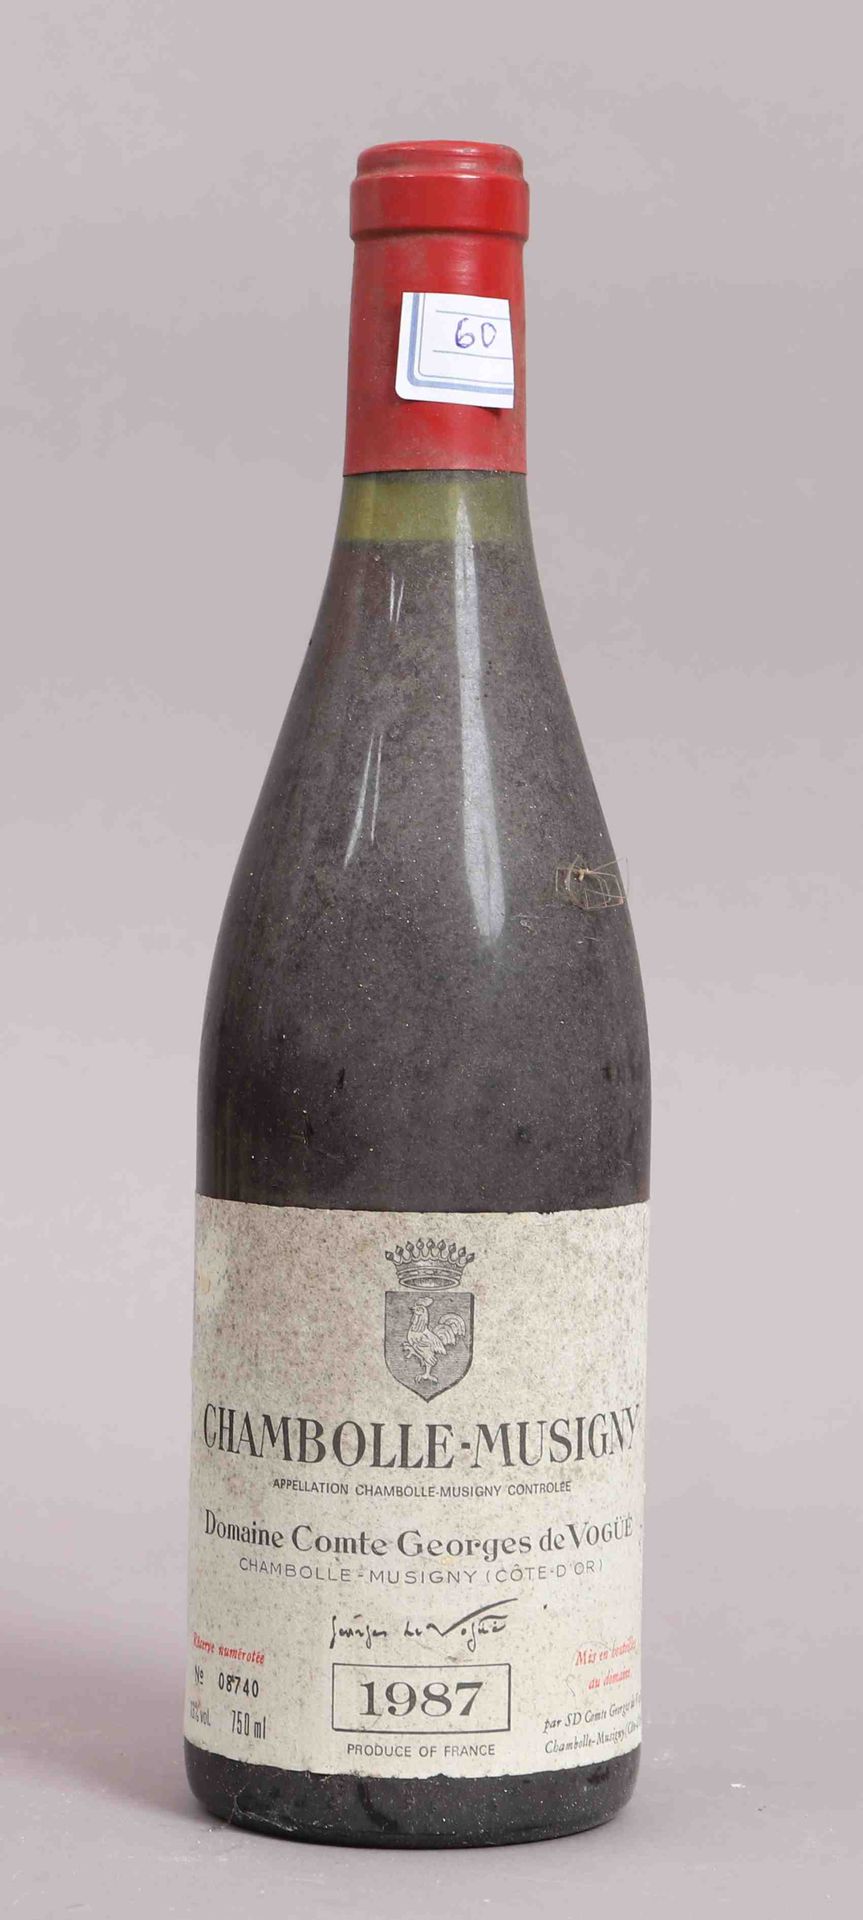 Null Chambolle-Musigny (x1) 
Domaine comte Georges de Vogue 
1987 
0,75L